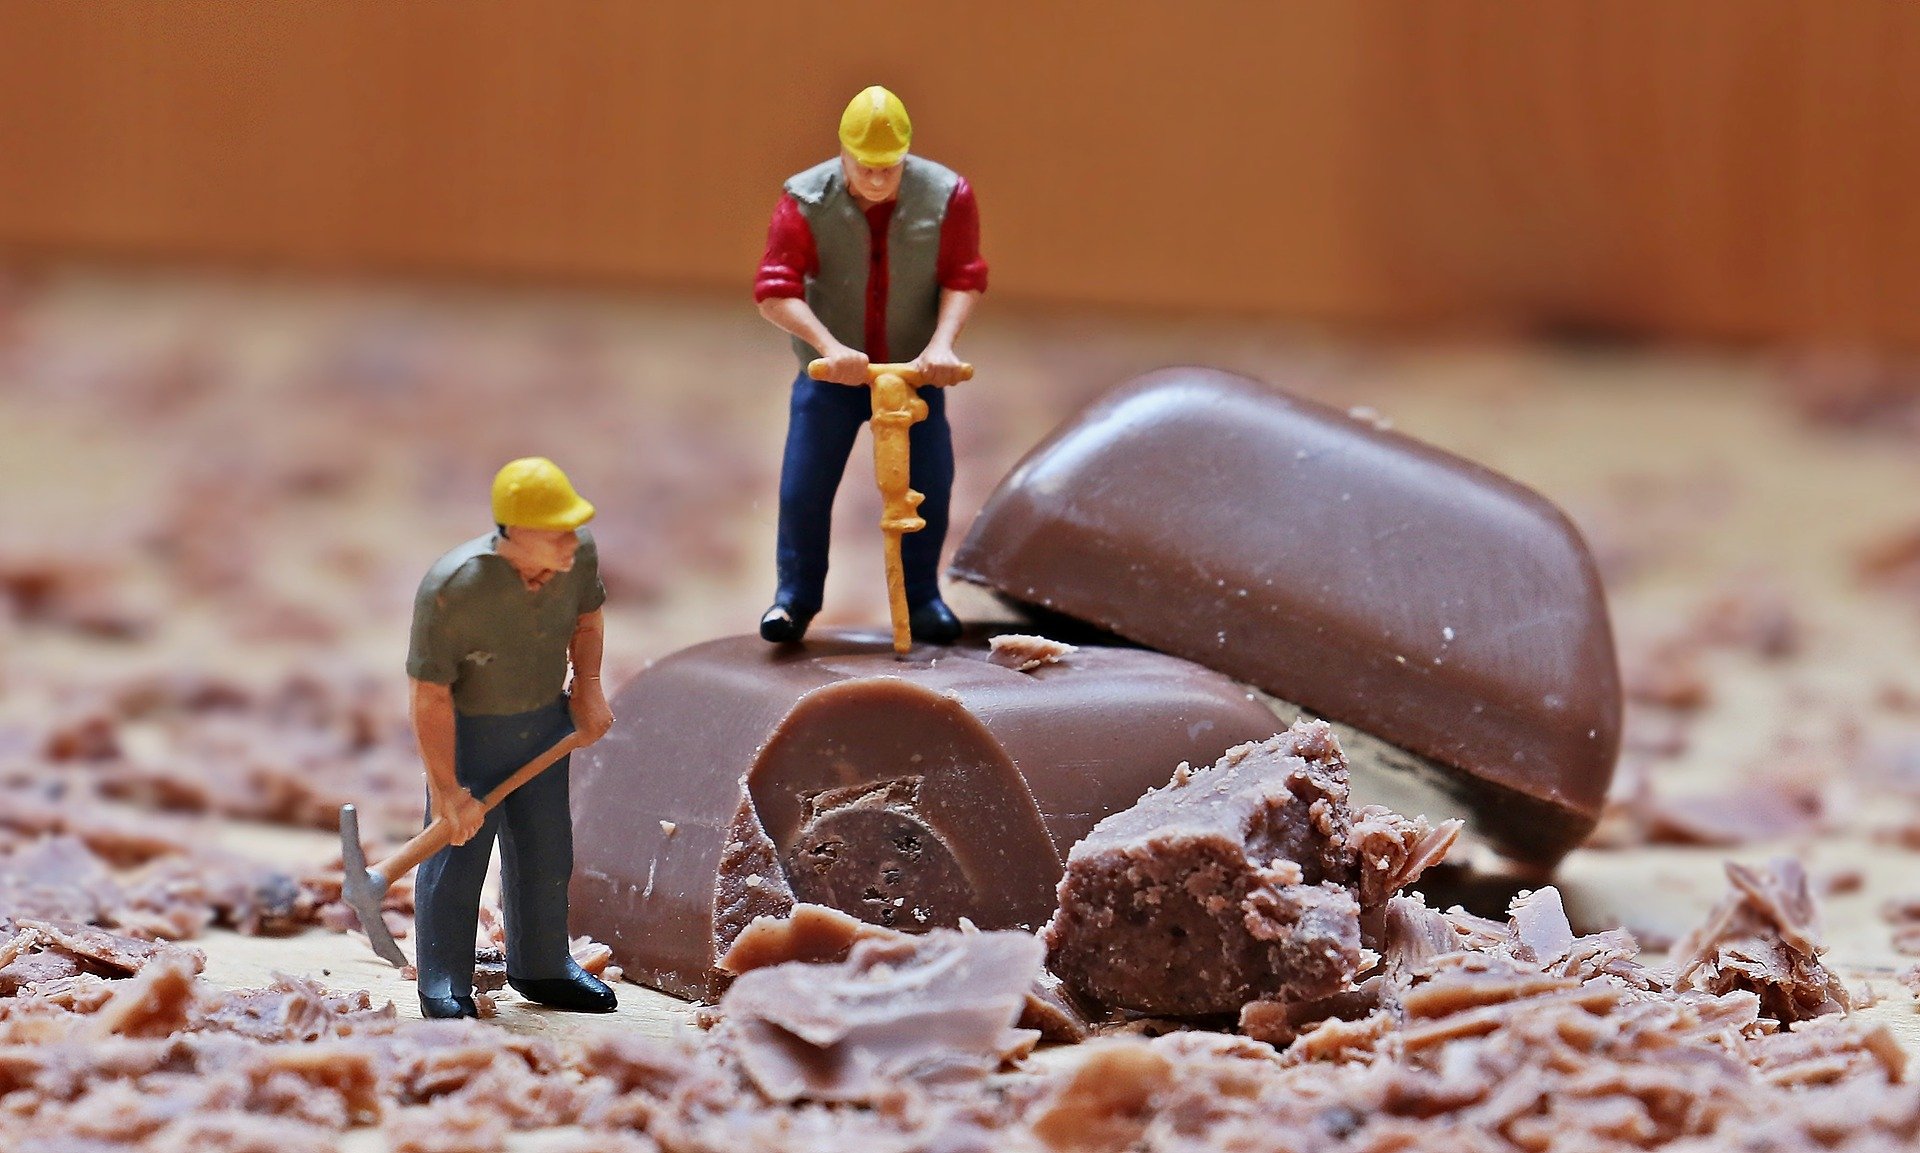 miniature figure workers accident at work claim